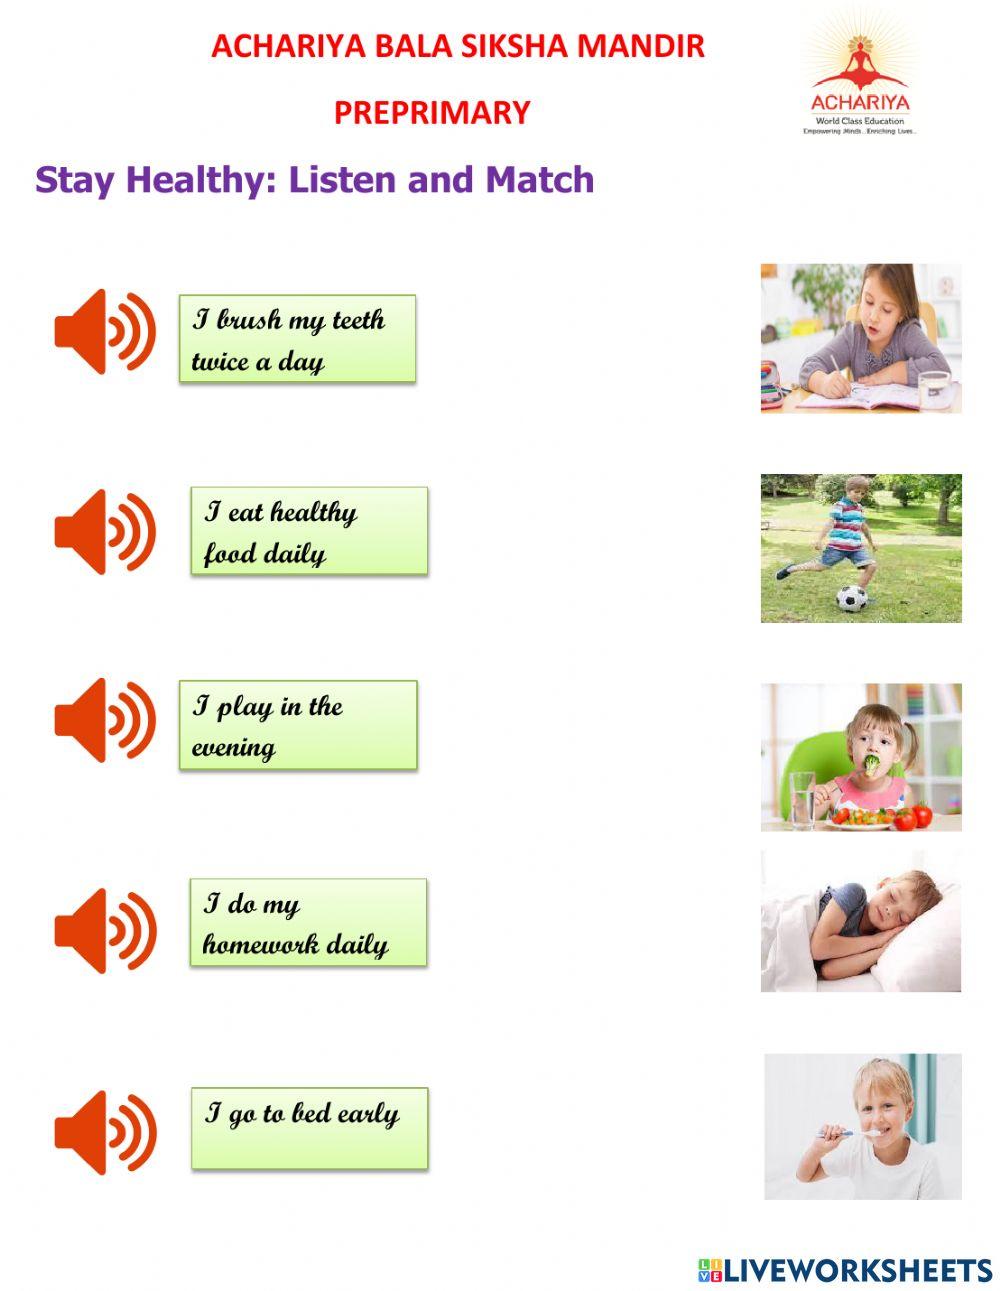 Listen and match - Stay healthy